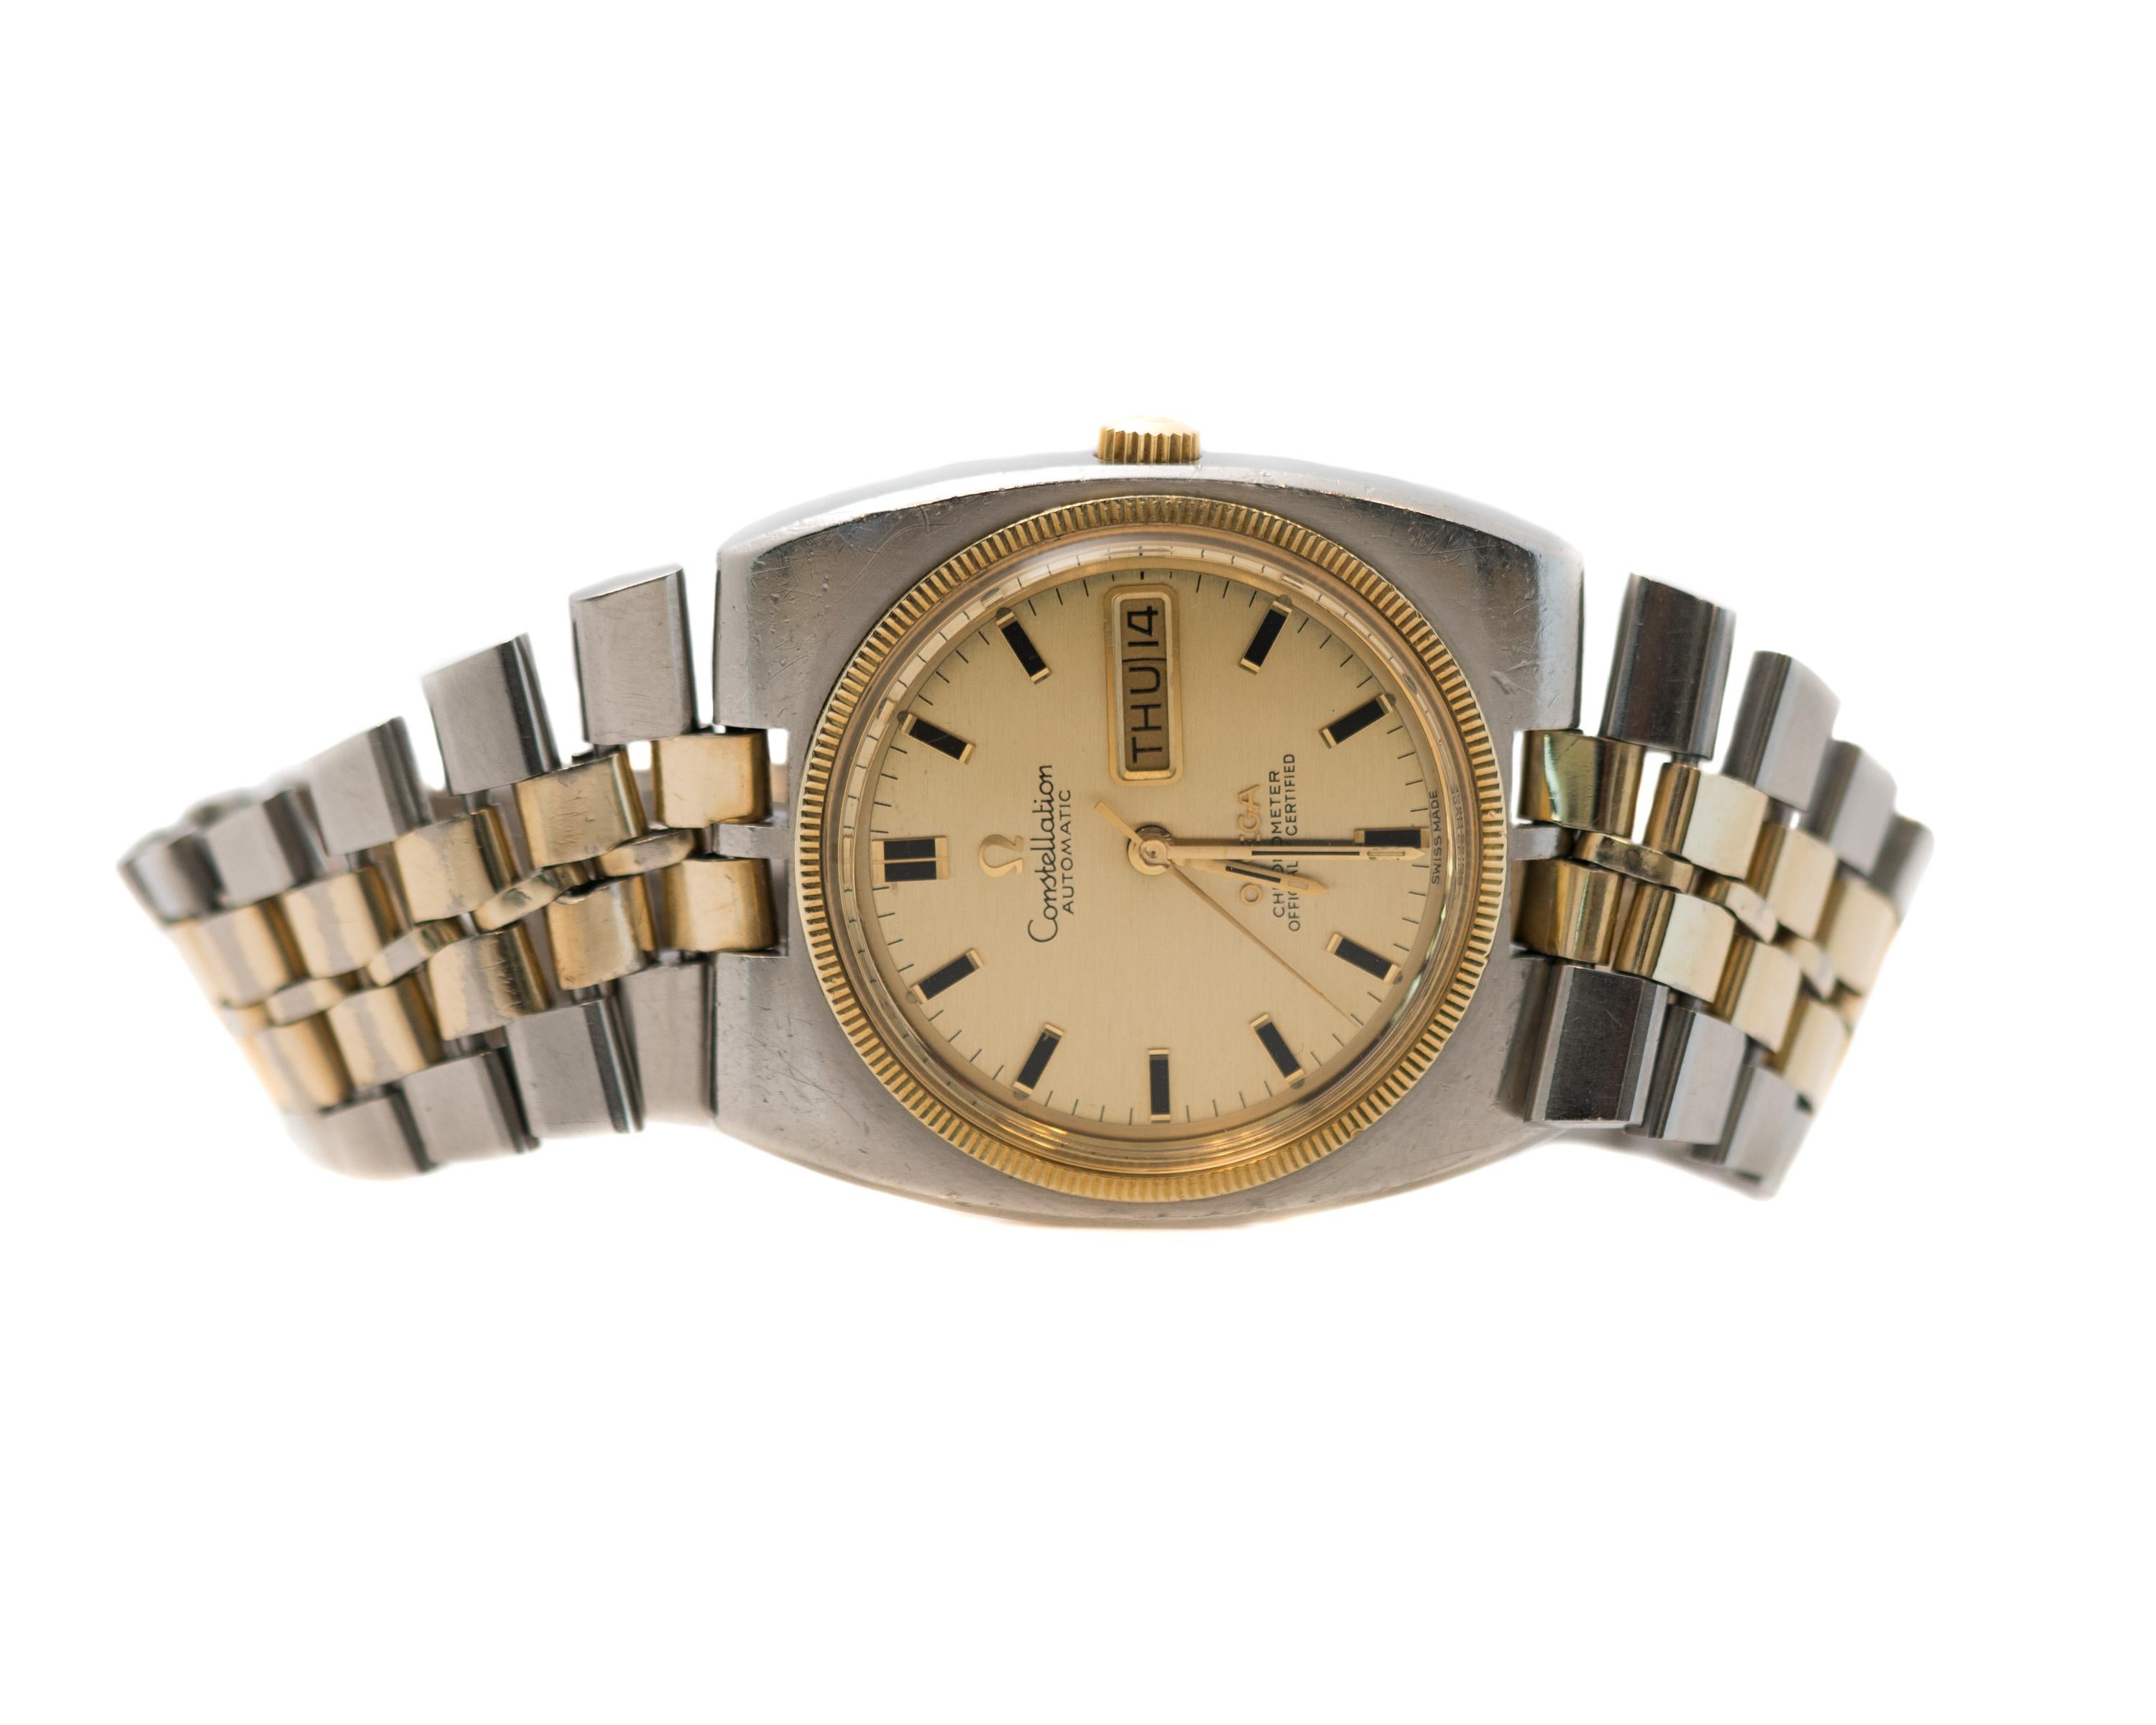 1950s Omega Constellation Wrist Watch - Stainless Steel, 14 Karat Yellow Gold Fill

Features: 
Case Diameter 41 millimeters without crown, 43 millimeters with crown
Stainless Steel with 14 Karat Yellow Gold fill Case and